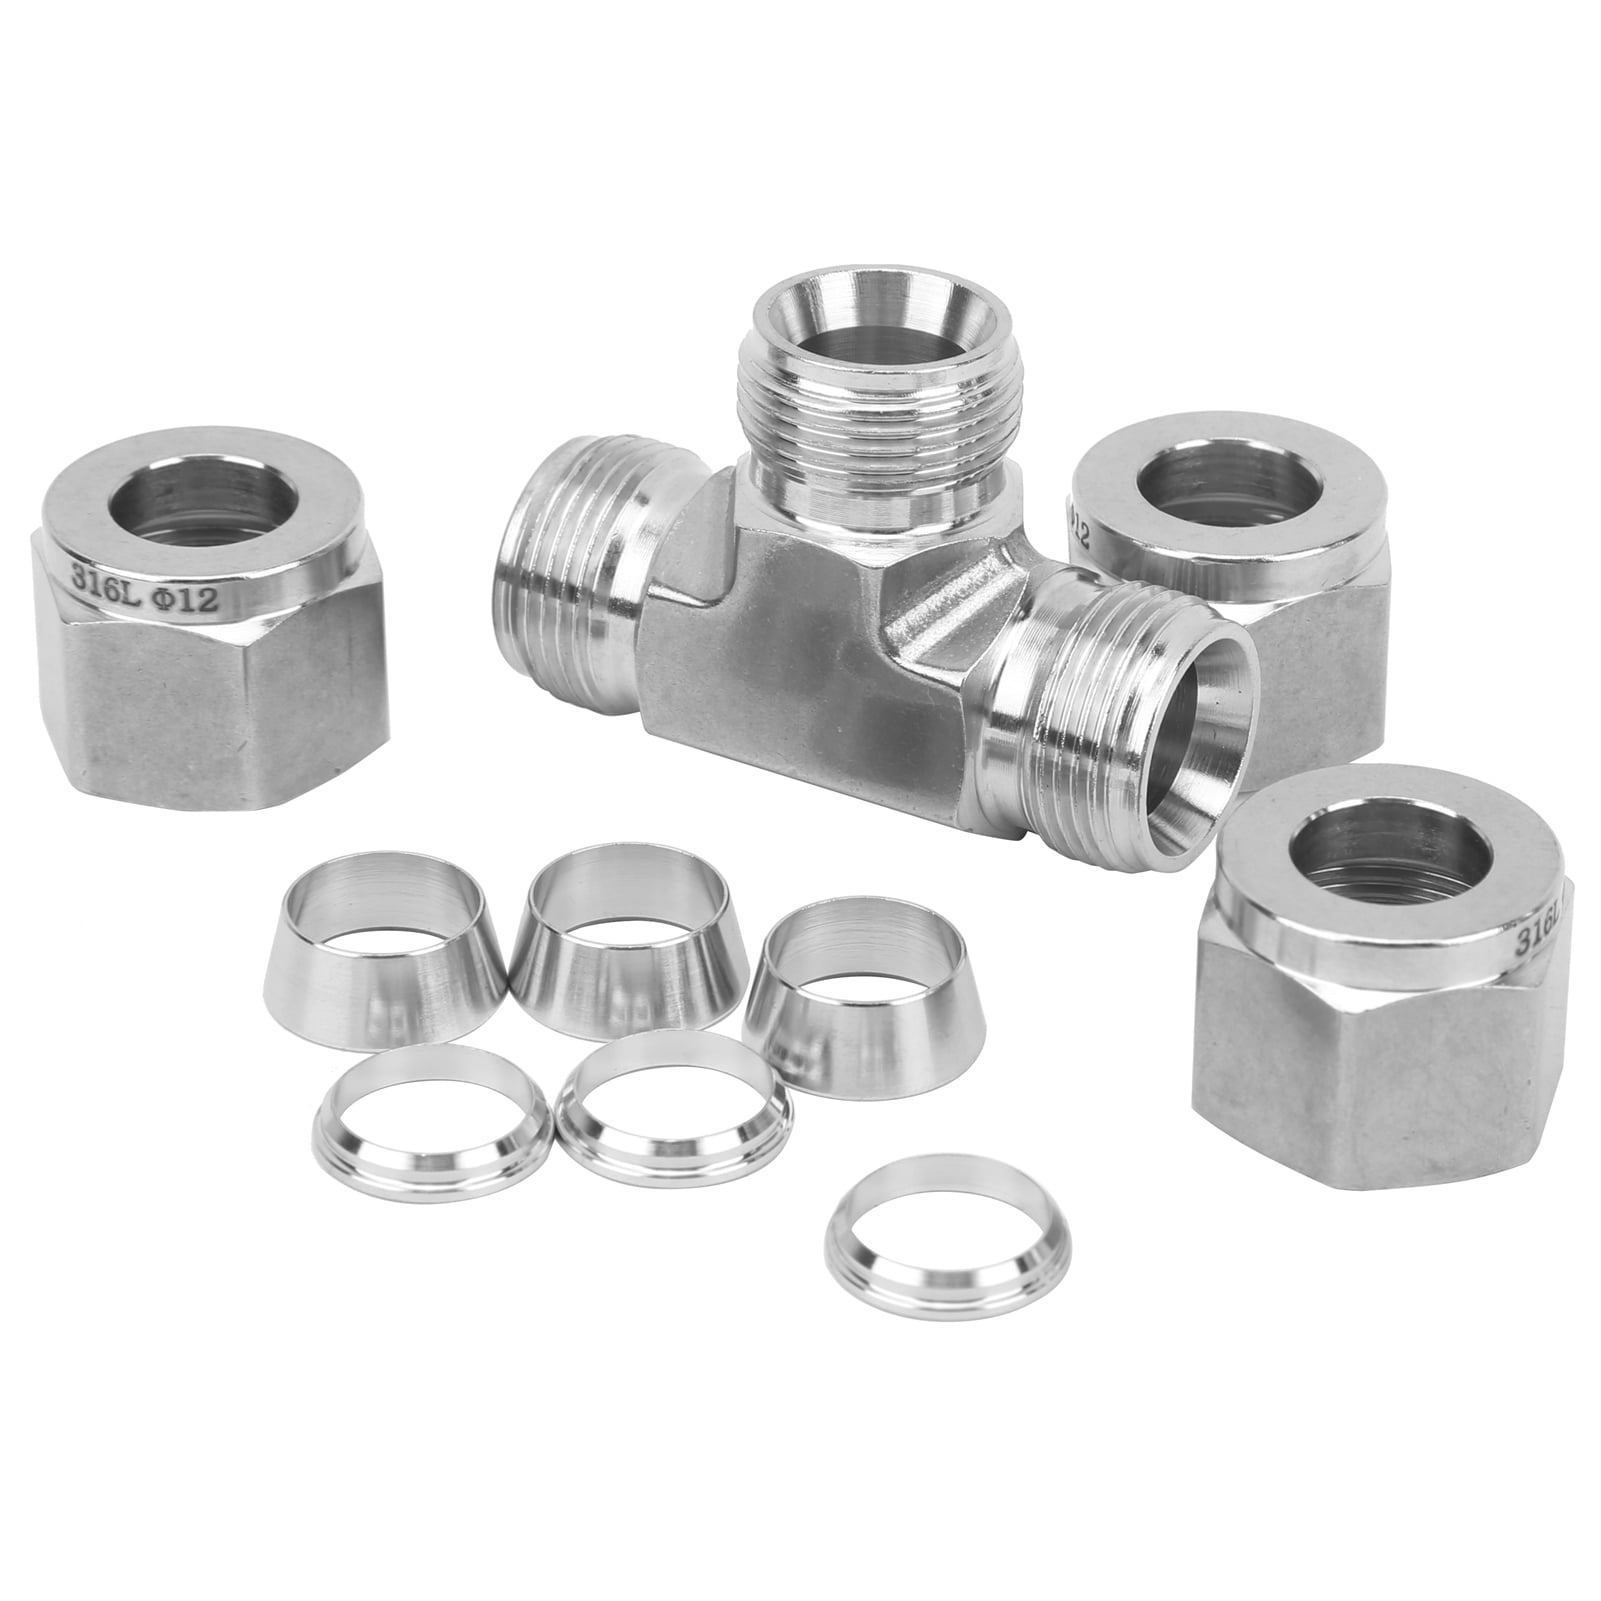 Compression Ferrule Connector Ф3 No Welding Good Sealing for 0.Impa-15Mpa ≤450℃ SS‑600‑3 Petroleum Exploration Double Ferrule Connection Tee Connector 